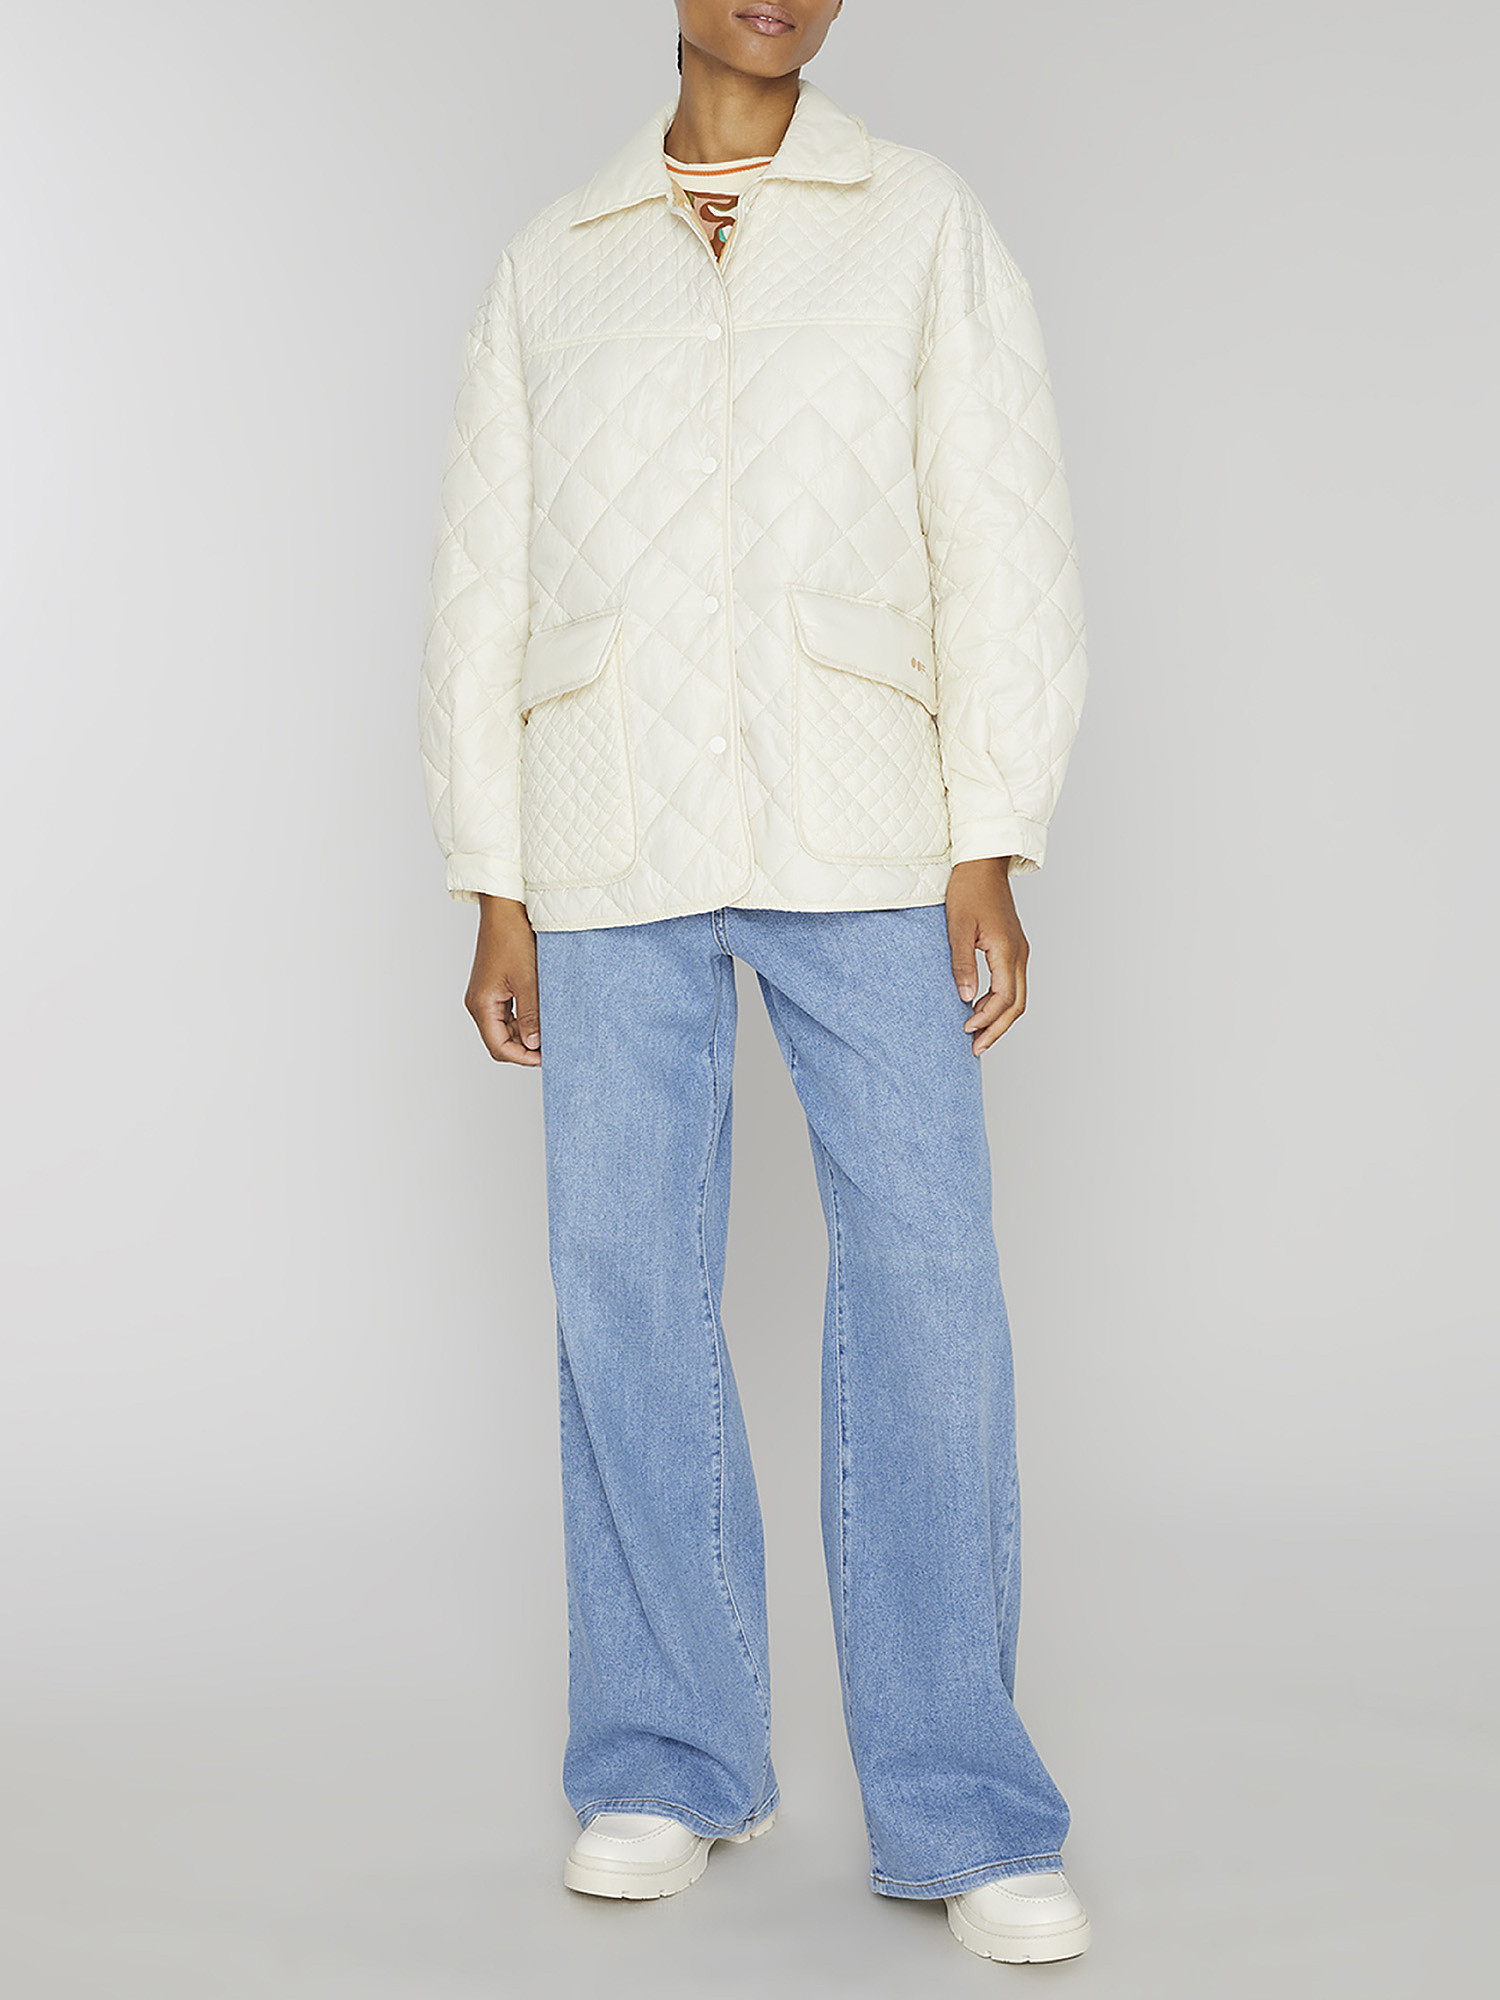 Oof Wear - Quilted Jacket, White Cream, large image number 1